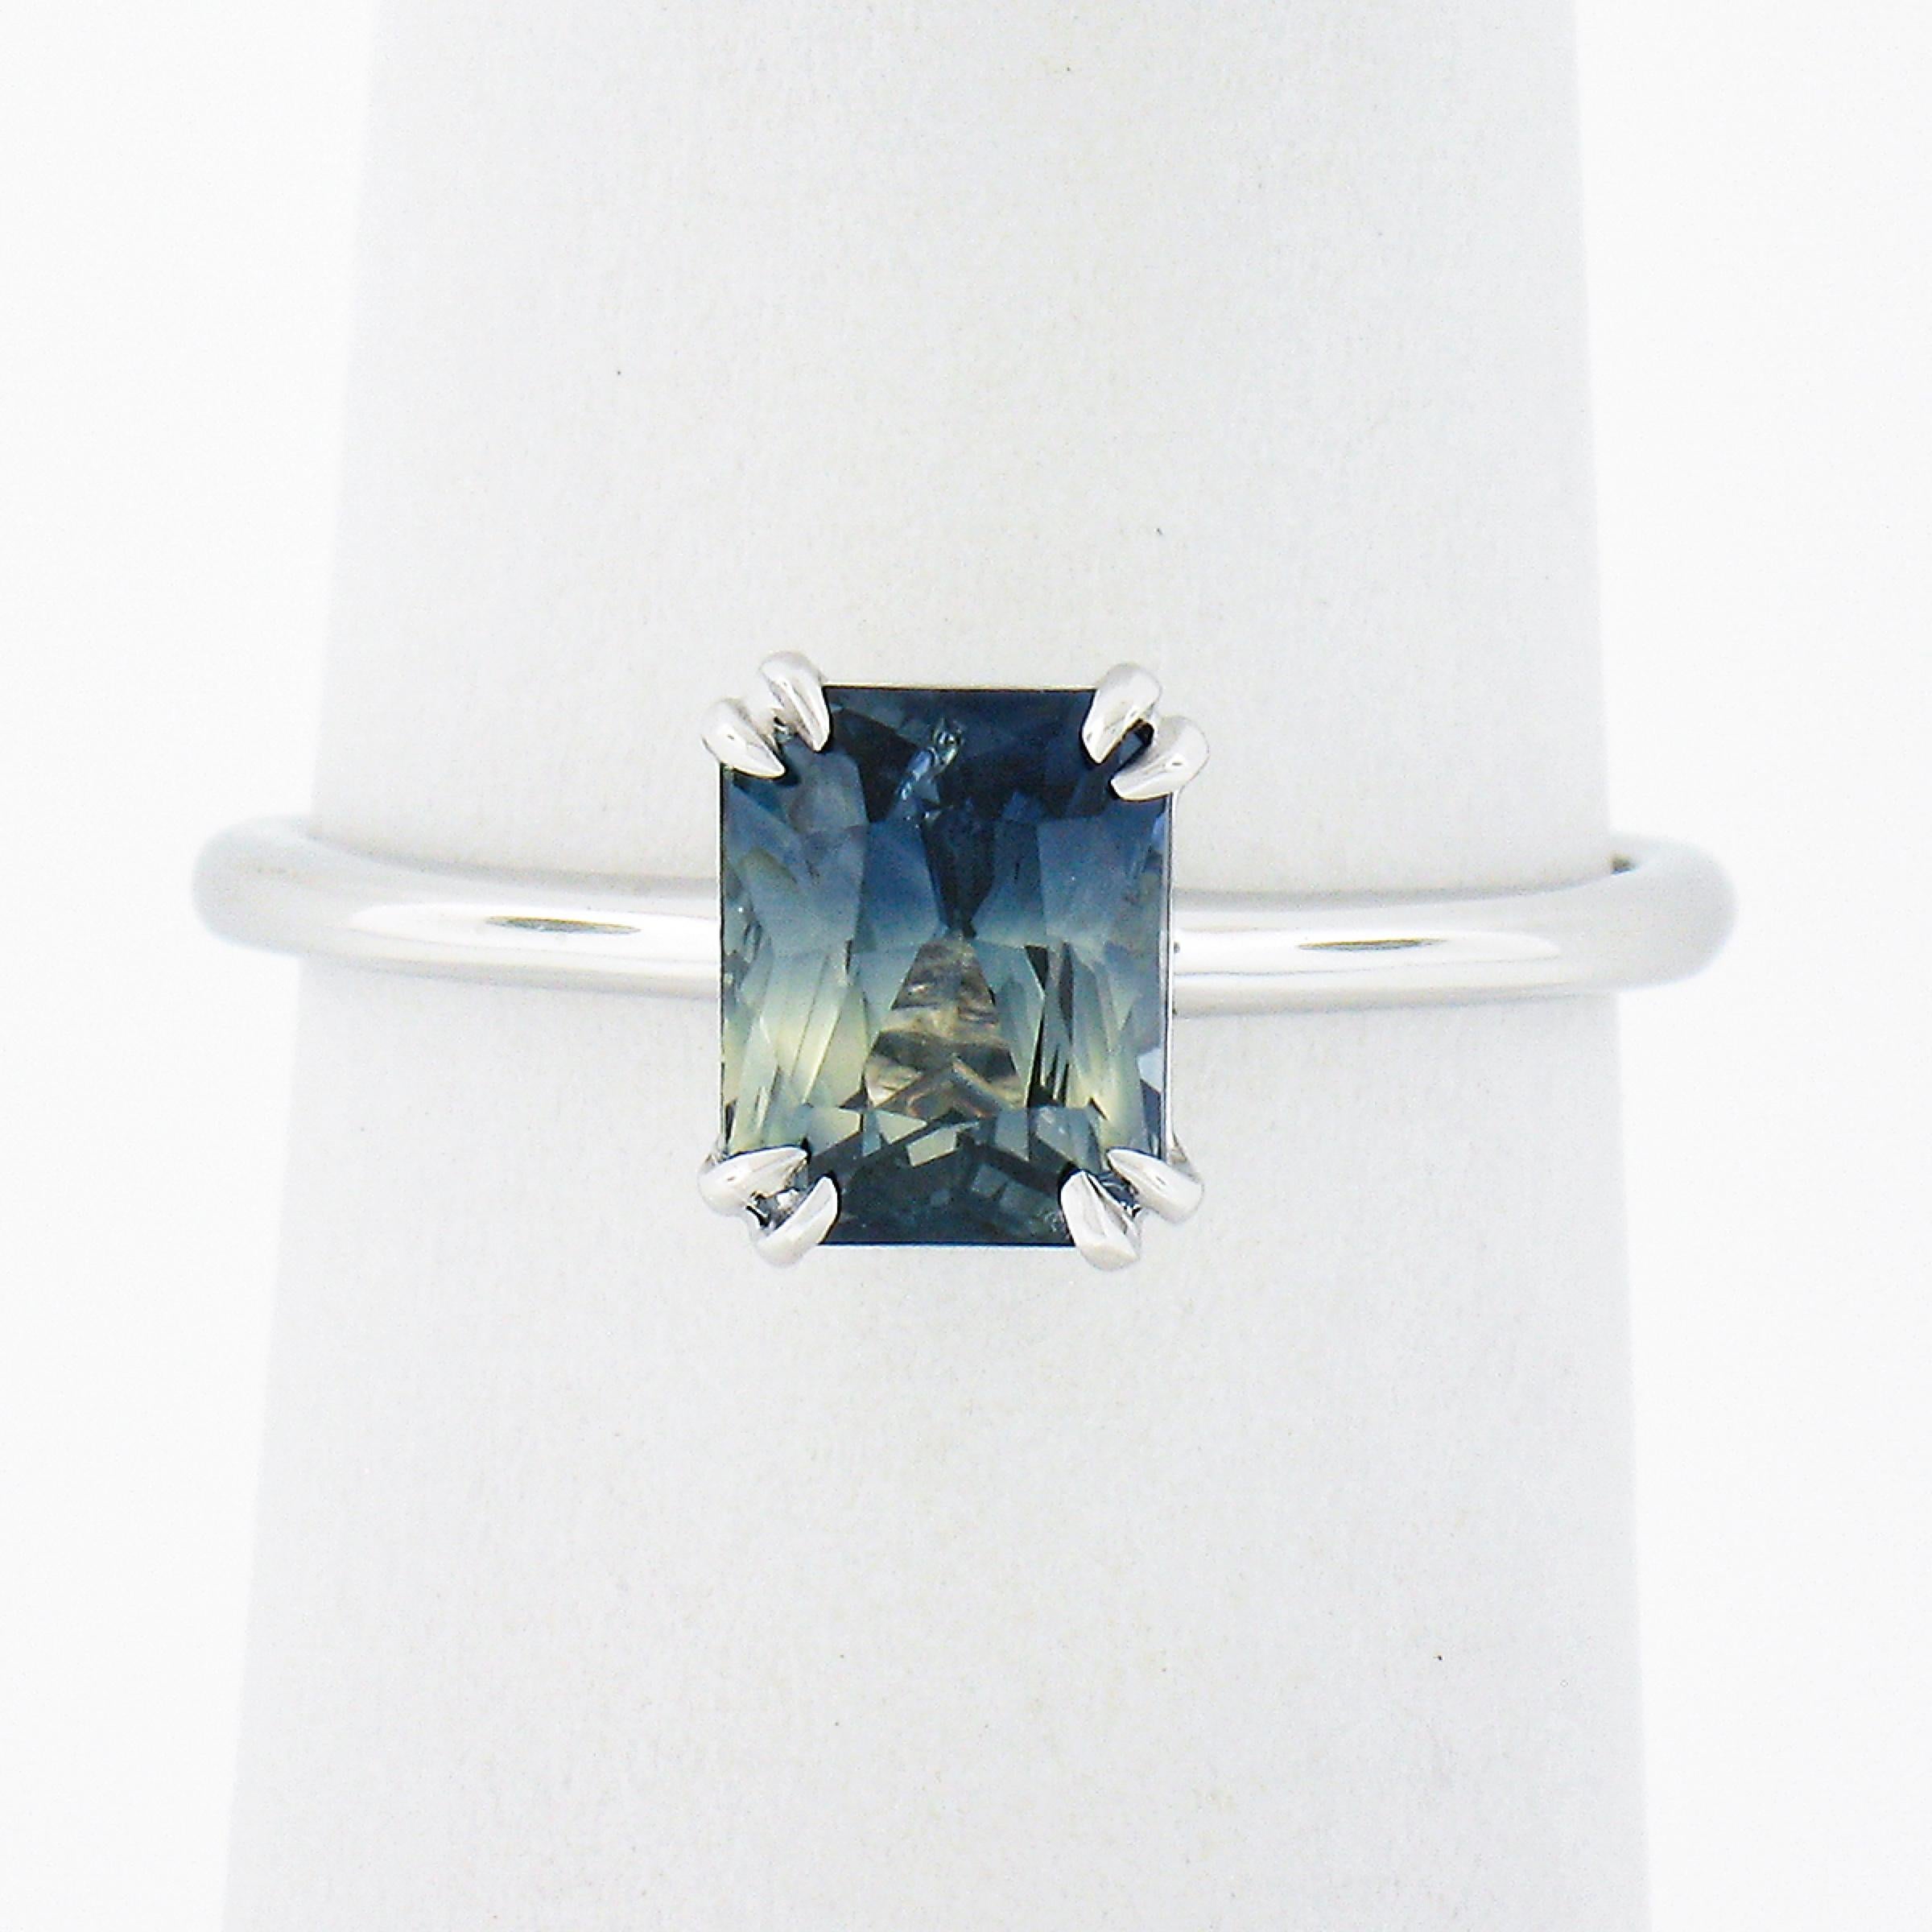 This classic solitaire ring is newly crafted from solid platinum and features a stunning, GIA certified, octagonal cut natural sapphire stone, elegantly double claw prong set at the center. This gorgeous and unique stone shows naturally zoned blue